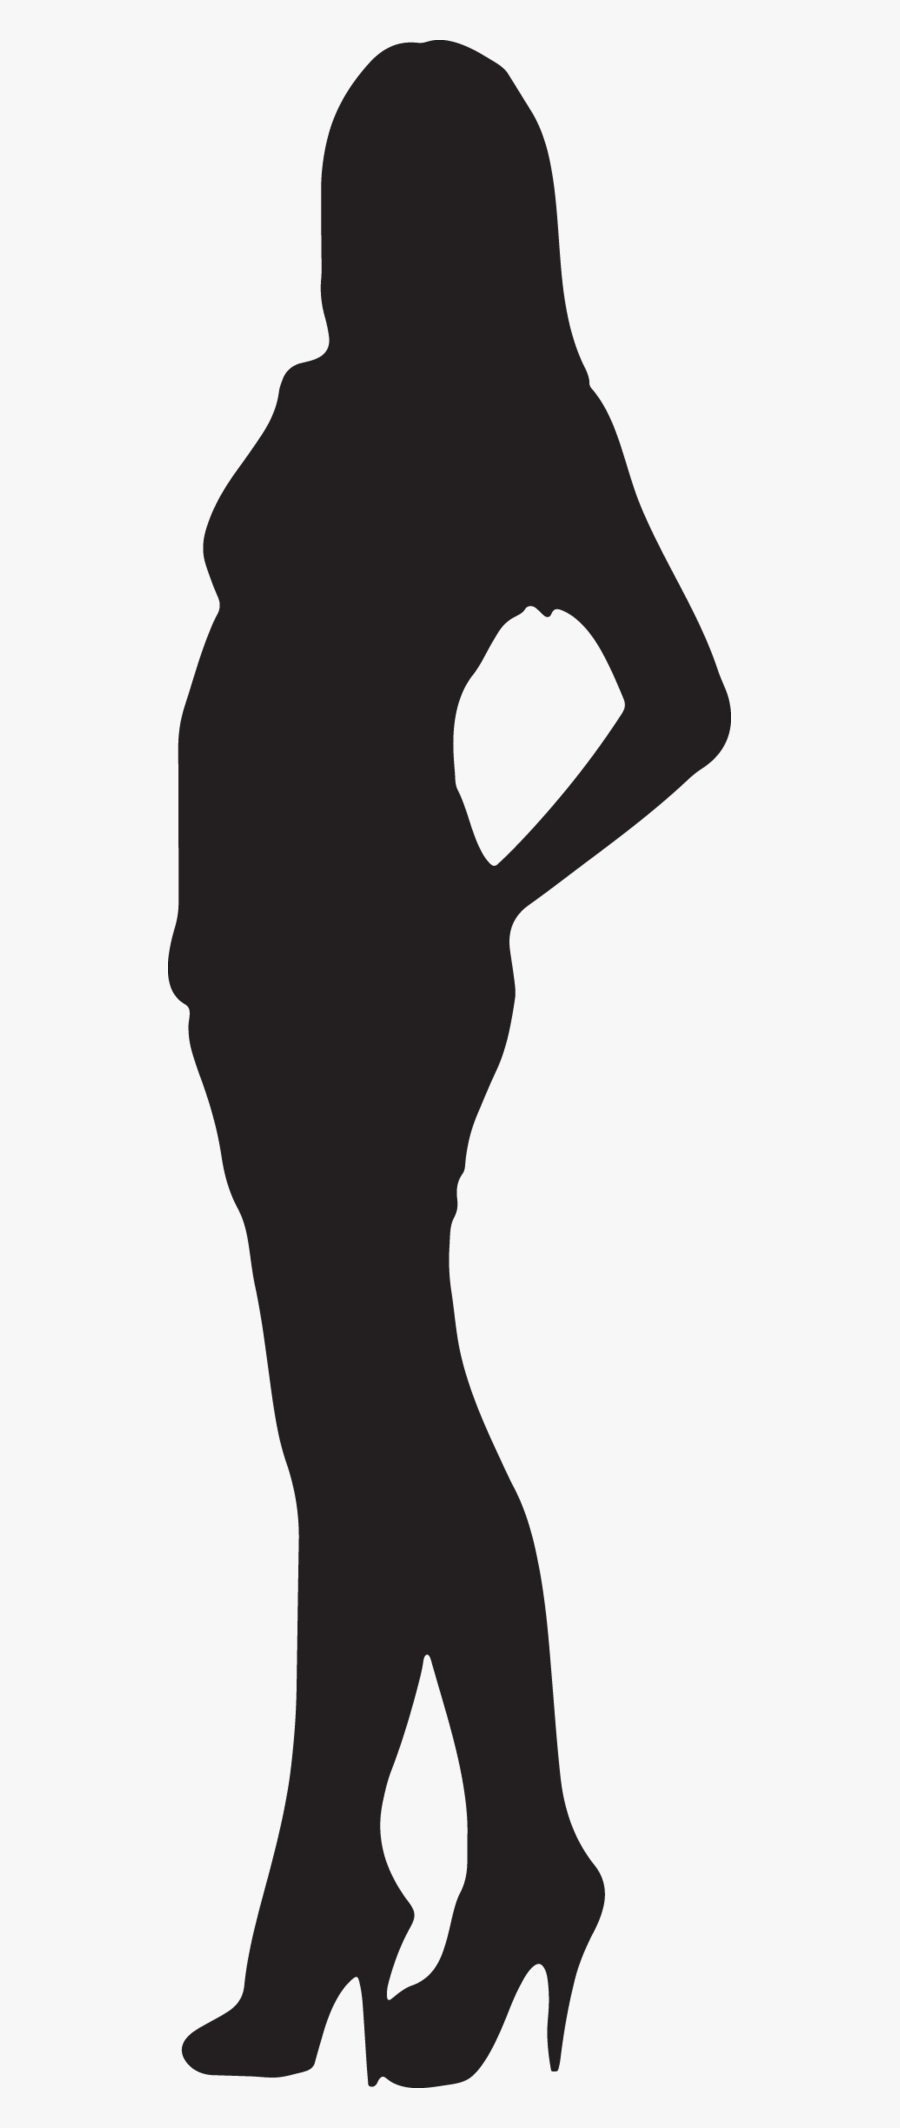 Female Model Silhouette Png, Transparent Clipart